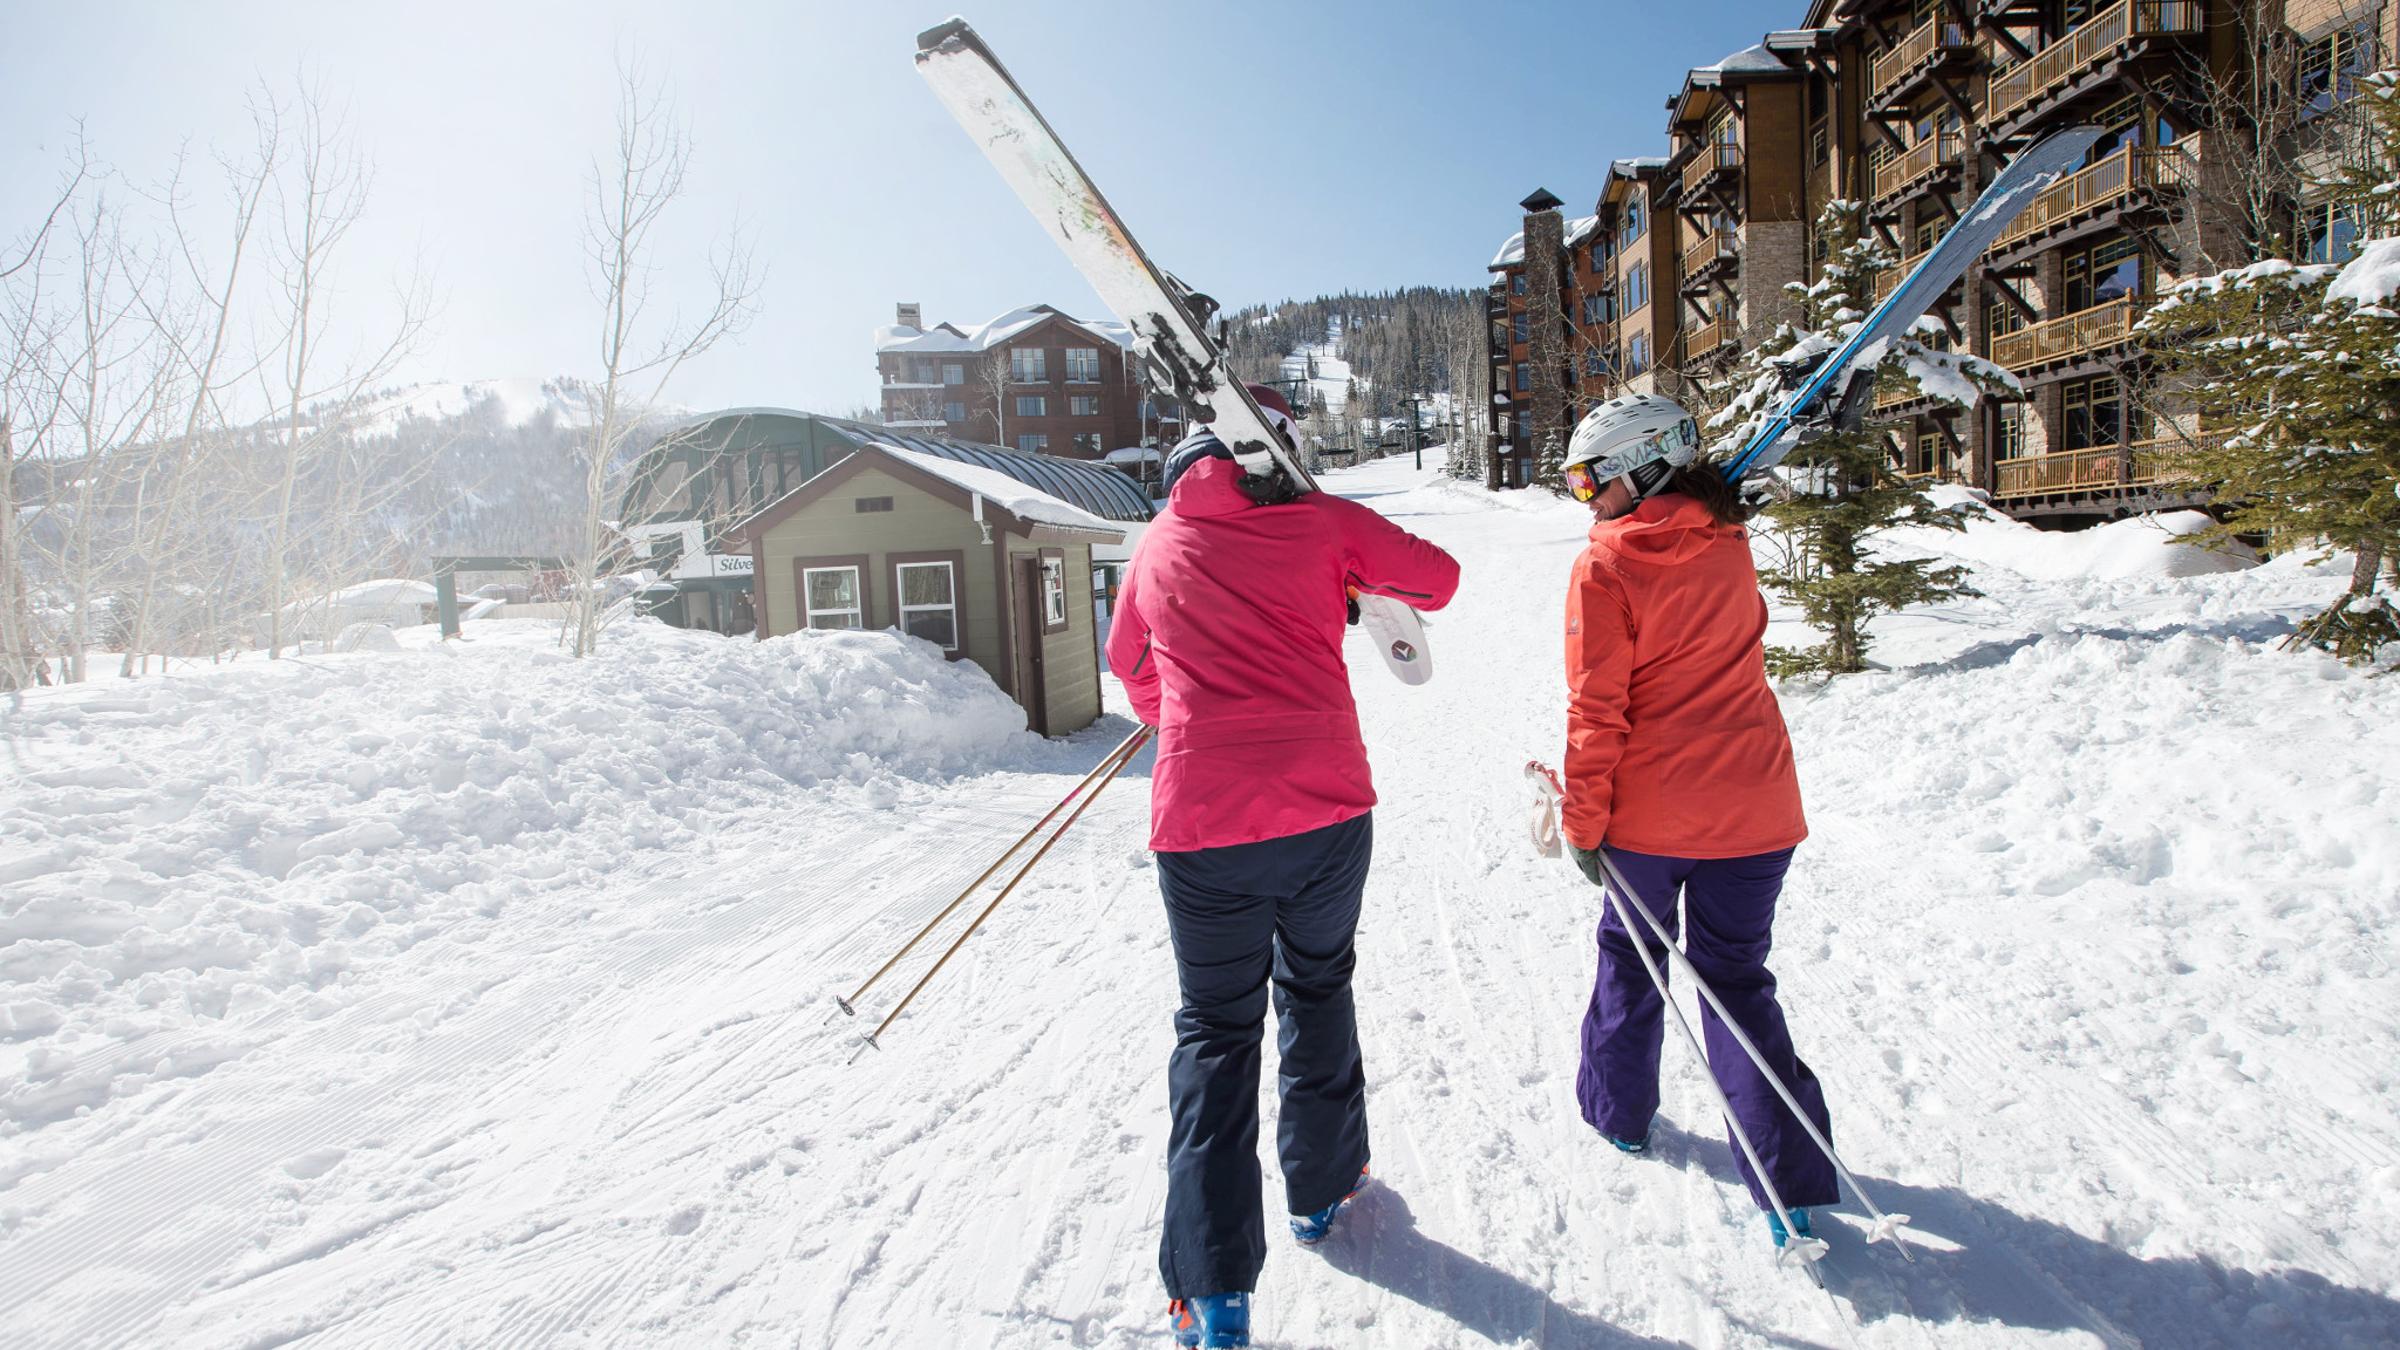 Two guests leaving their Deer Valley Resort lodging accommodations with their skis 